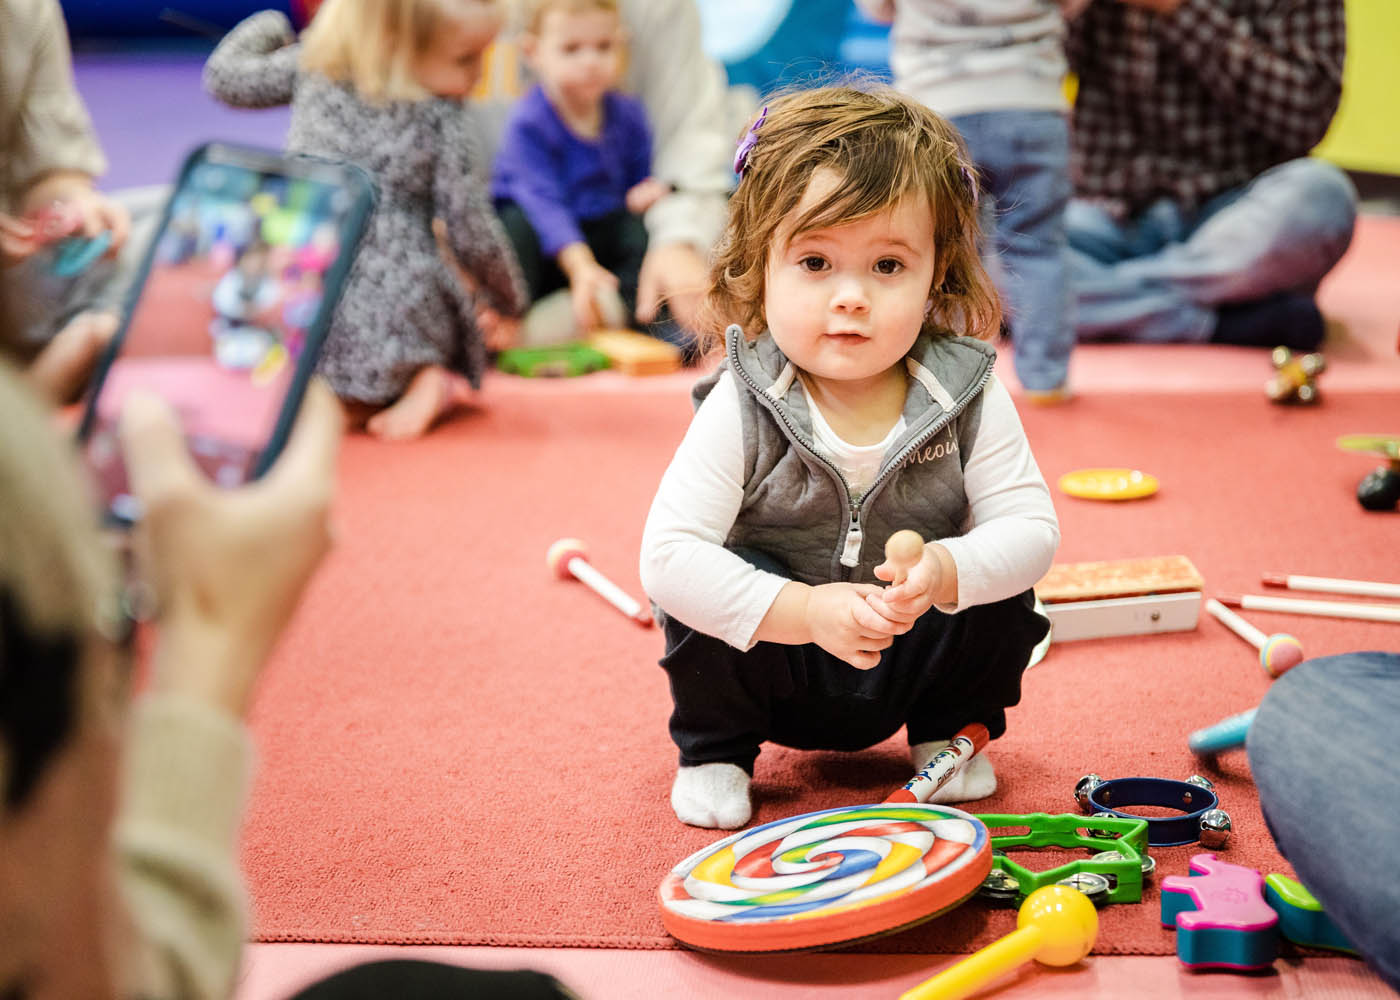 An adorable girl playing with musical instruments, an excellent activity for kids at Romp n' Roll West End birthday parties.